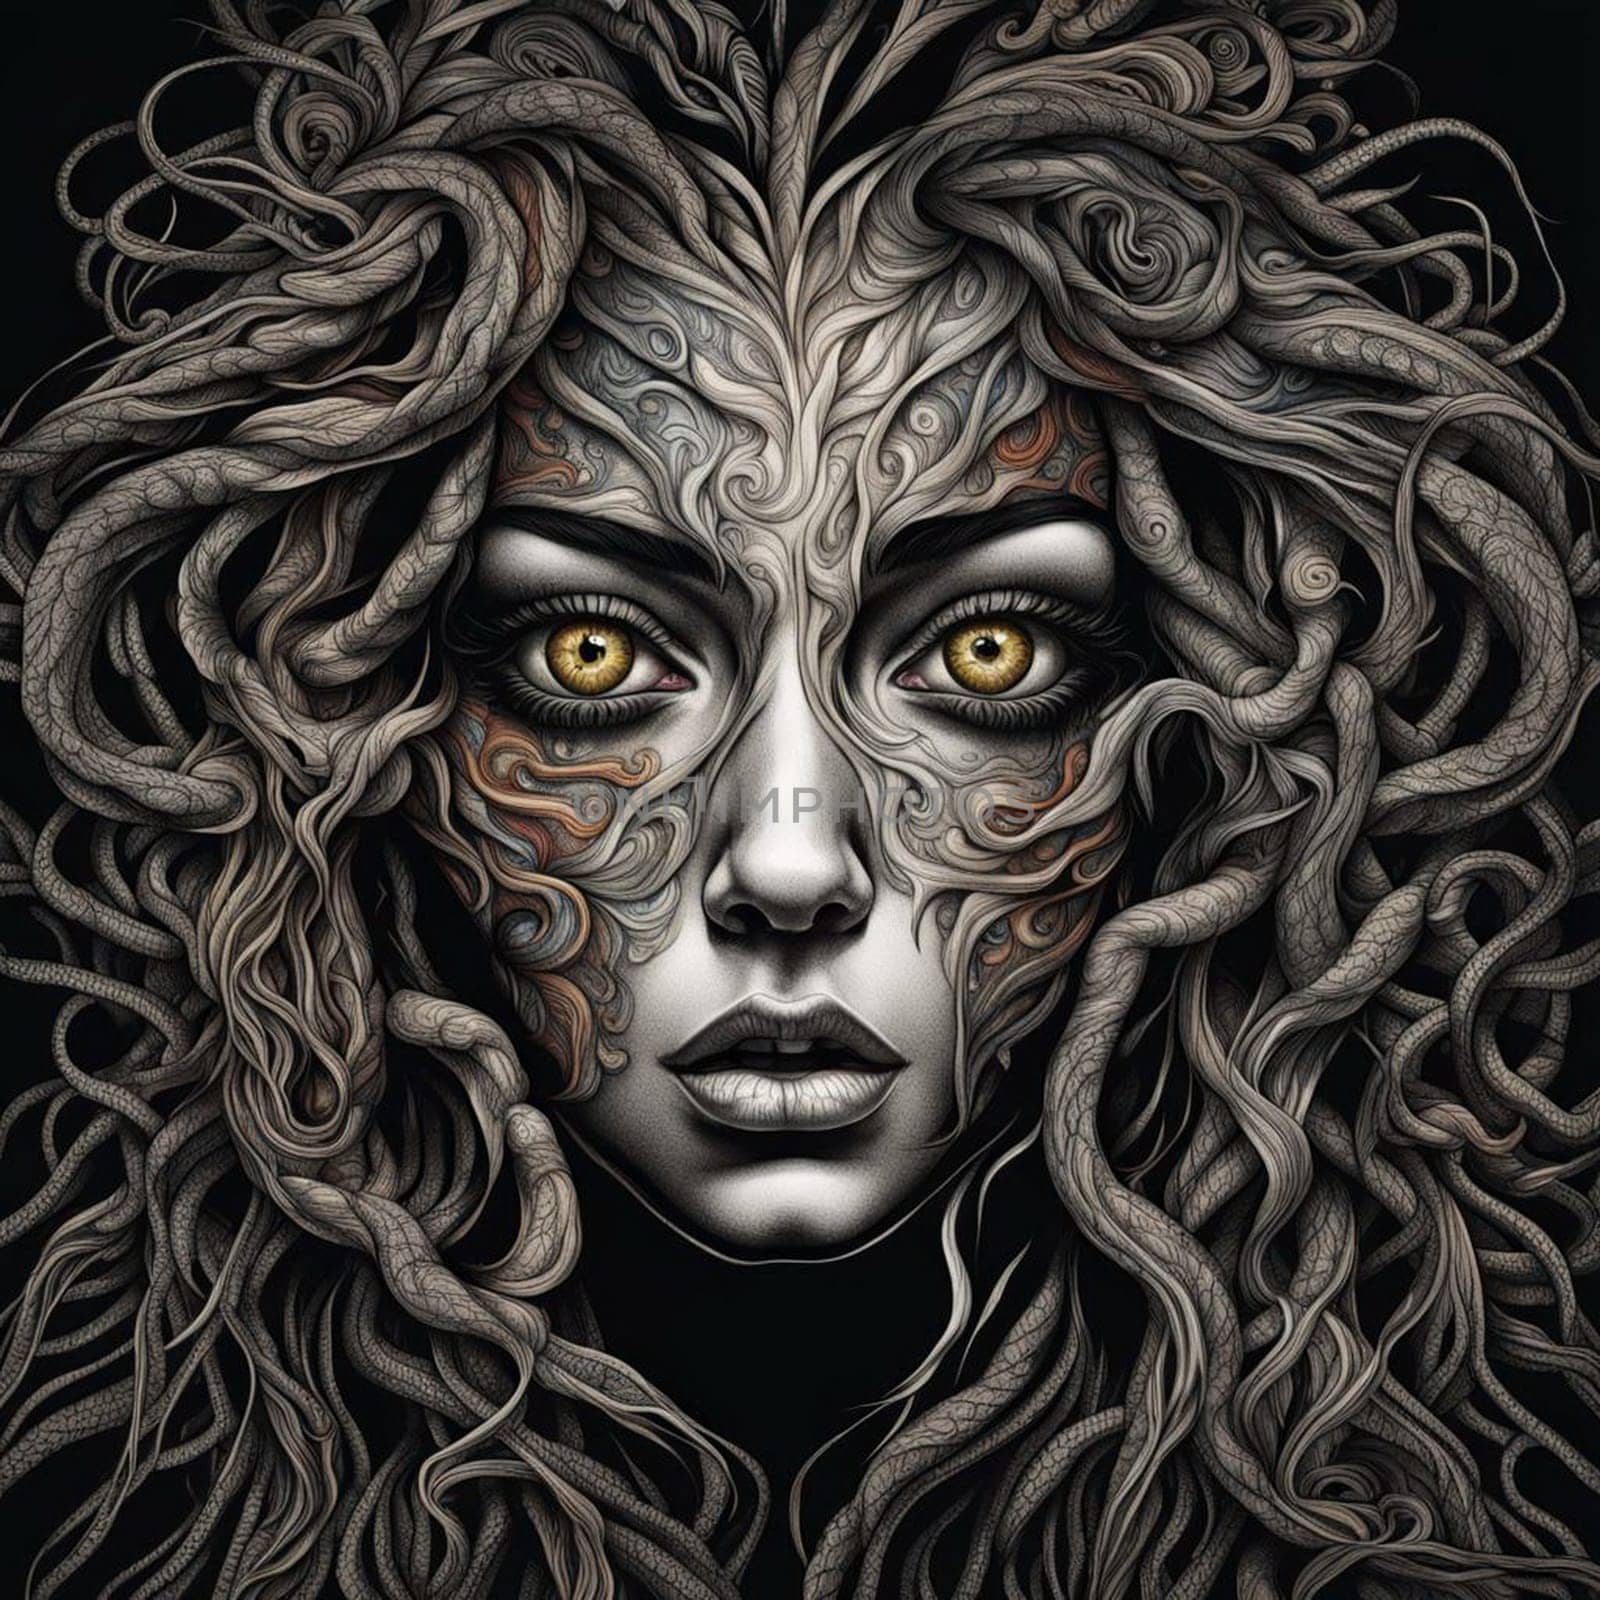 AI generated portrait of a Medusa in monochrome against a white background.